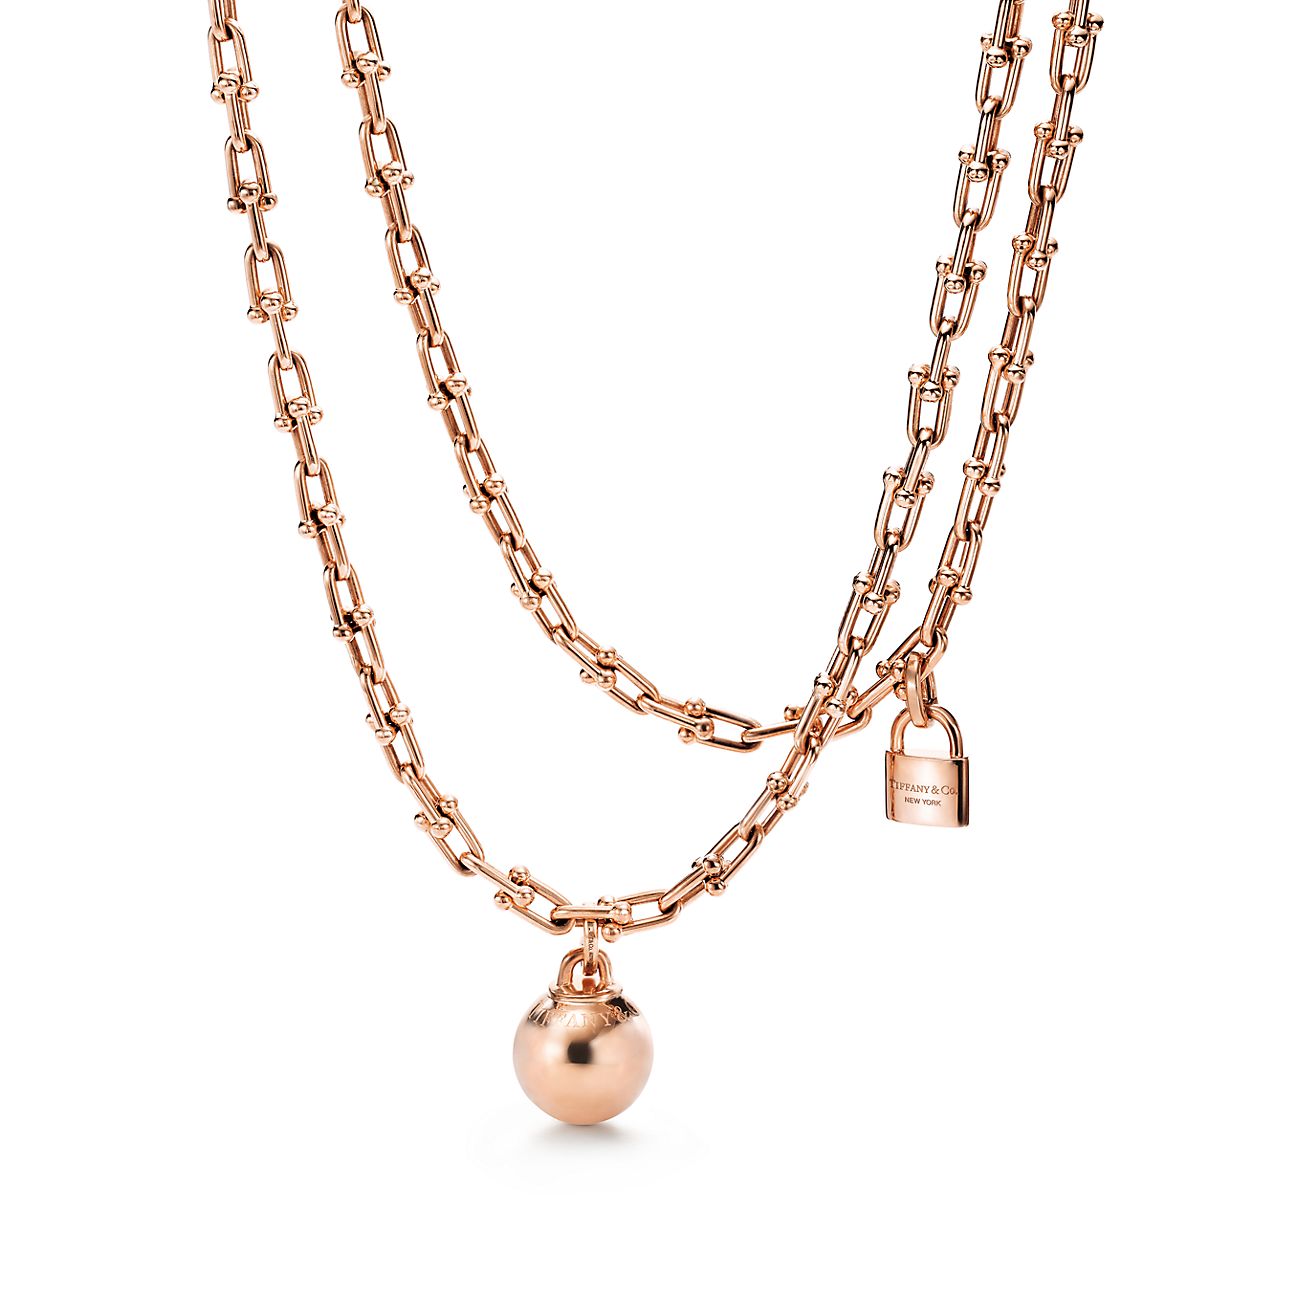 Tiffany HardWear Link Necklace in Yellow Gold with Freshwater Pearls |  Tiffany & Co.